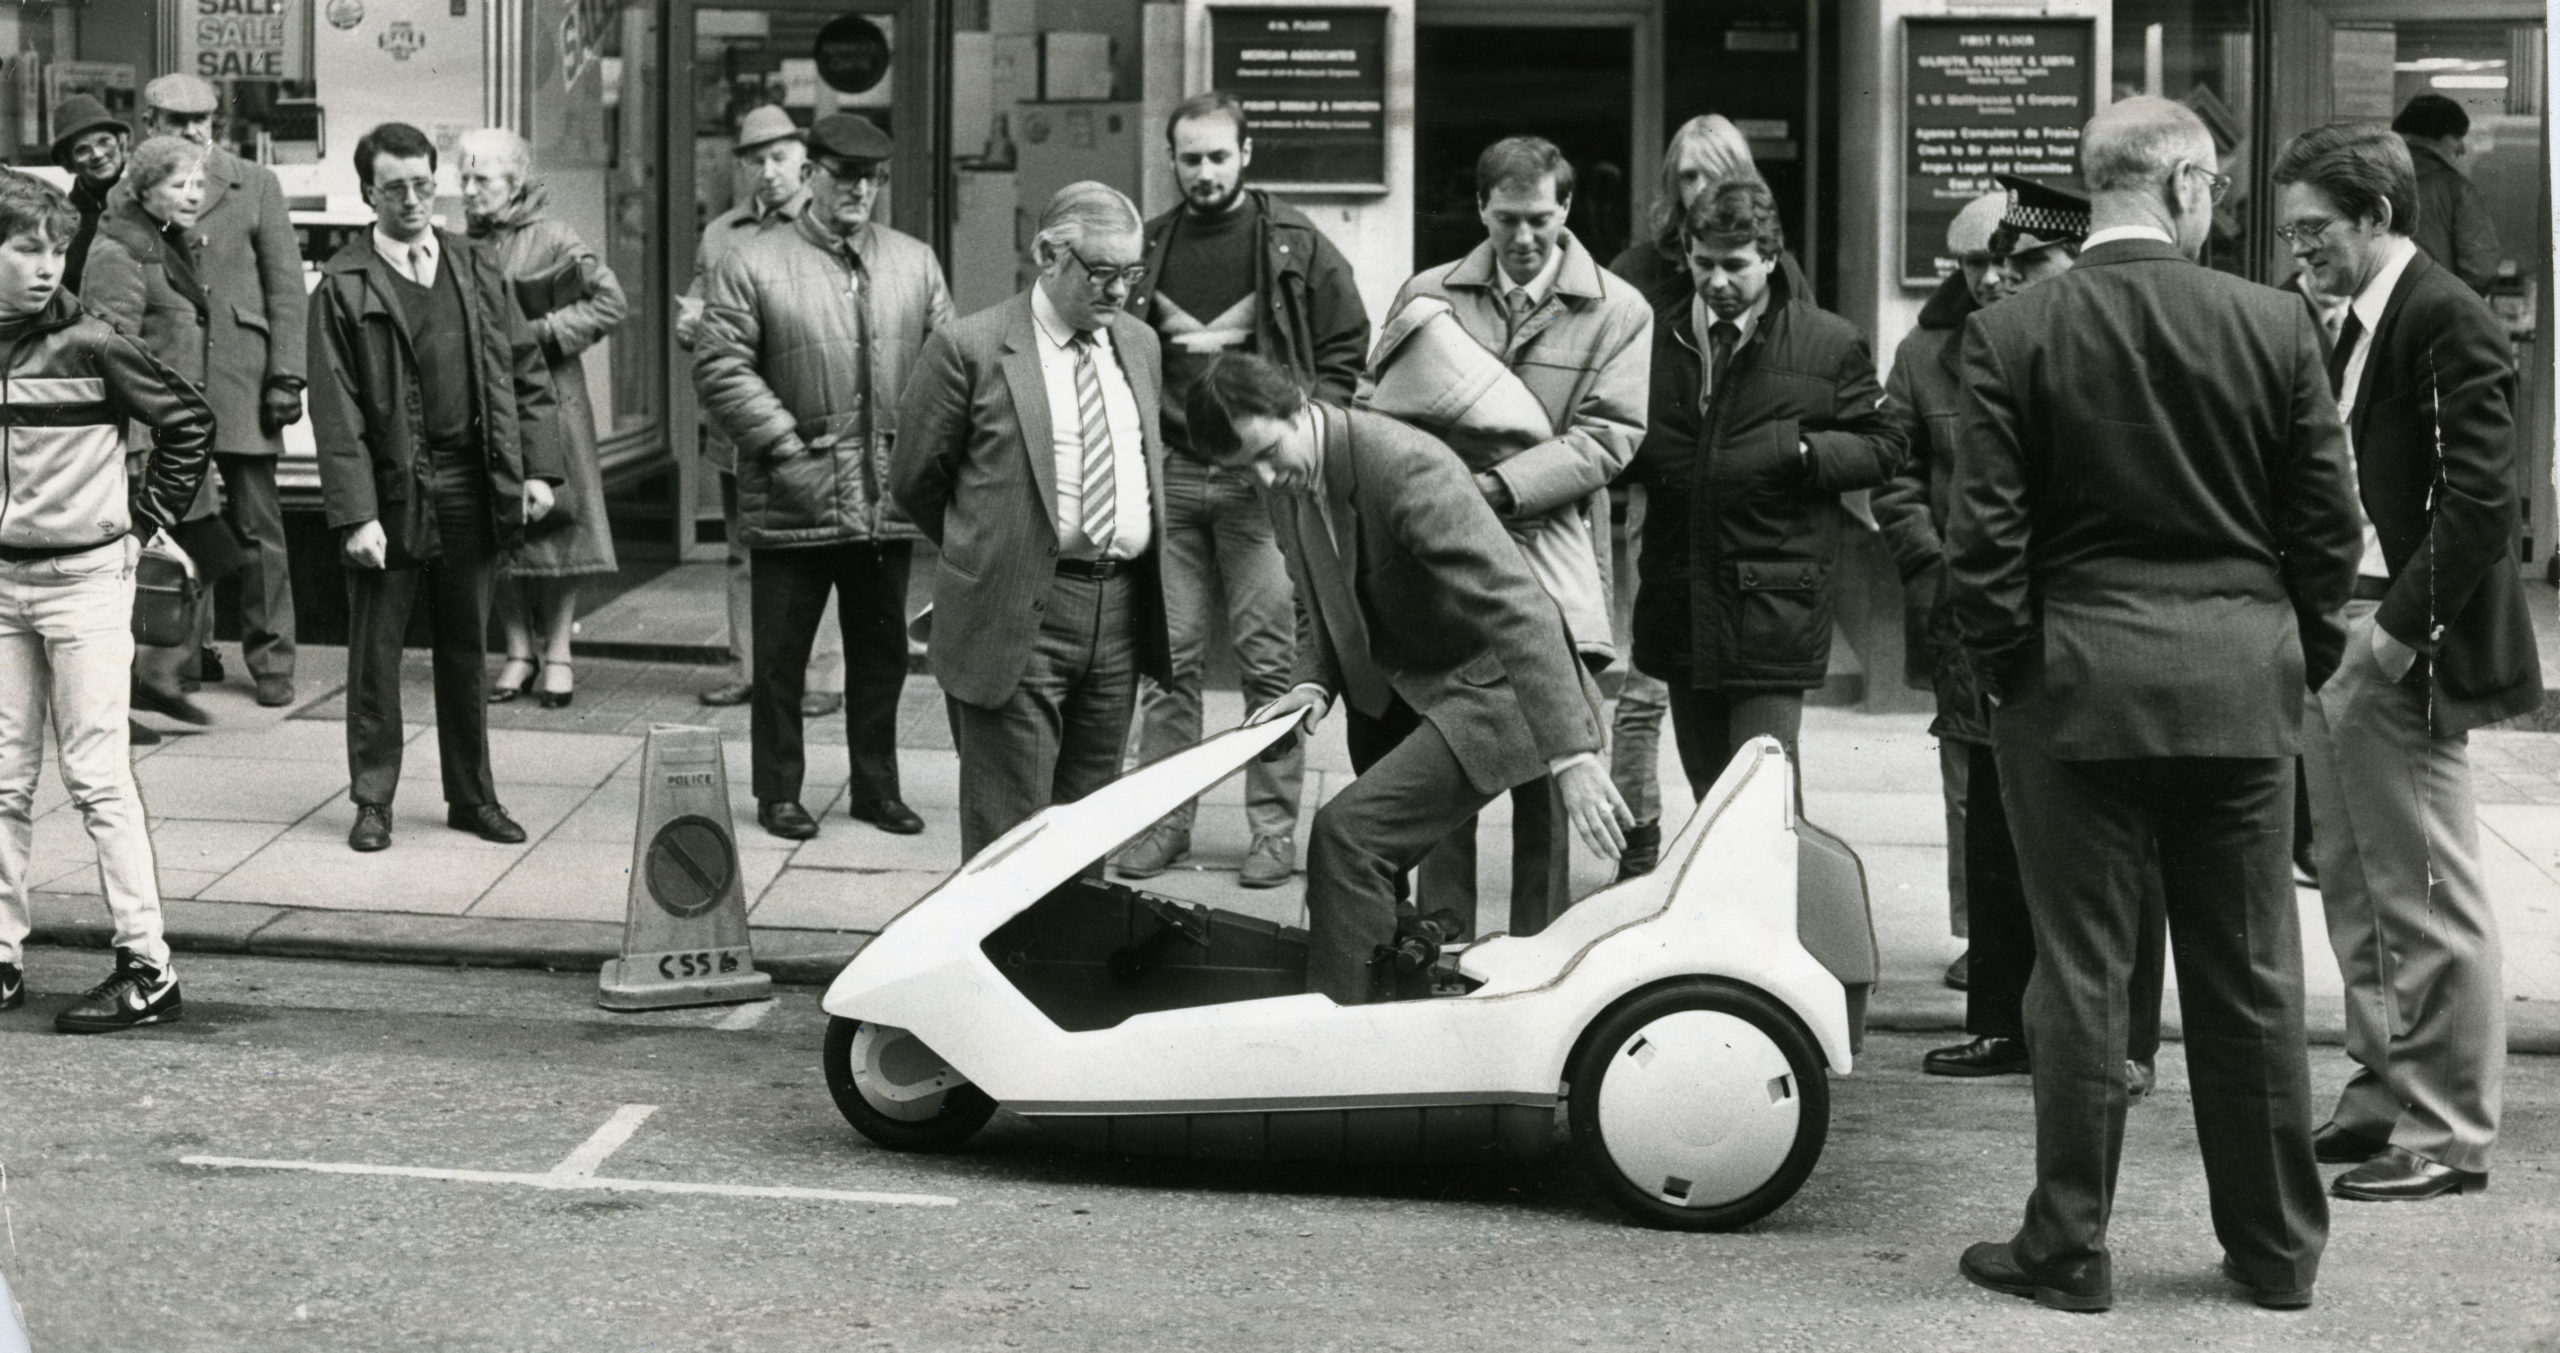 Mr Lamb in the Sinclair C5 before it limped to a halt during its test run.